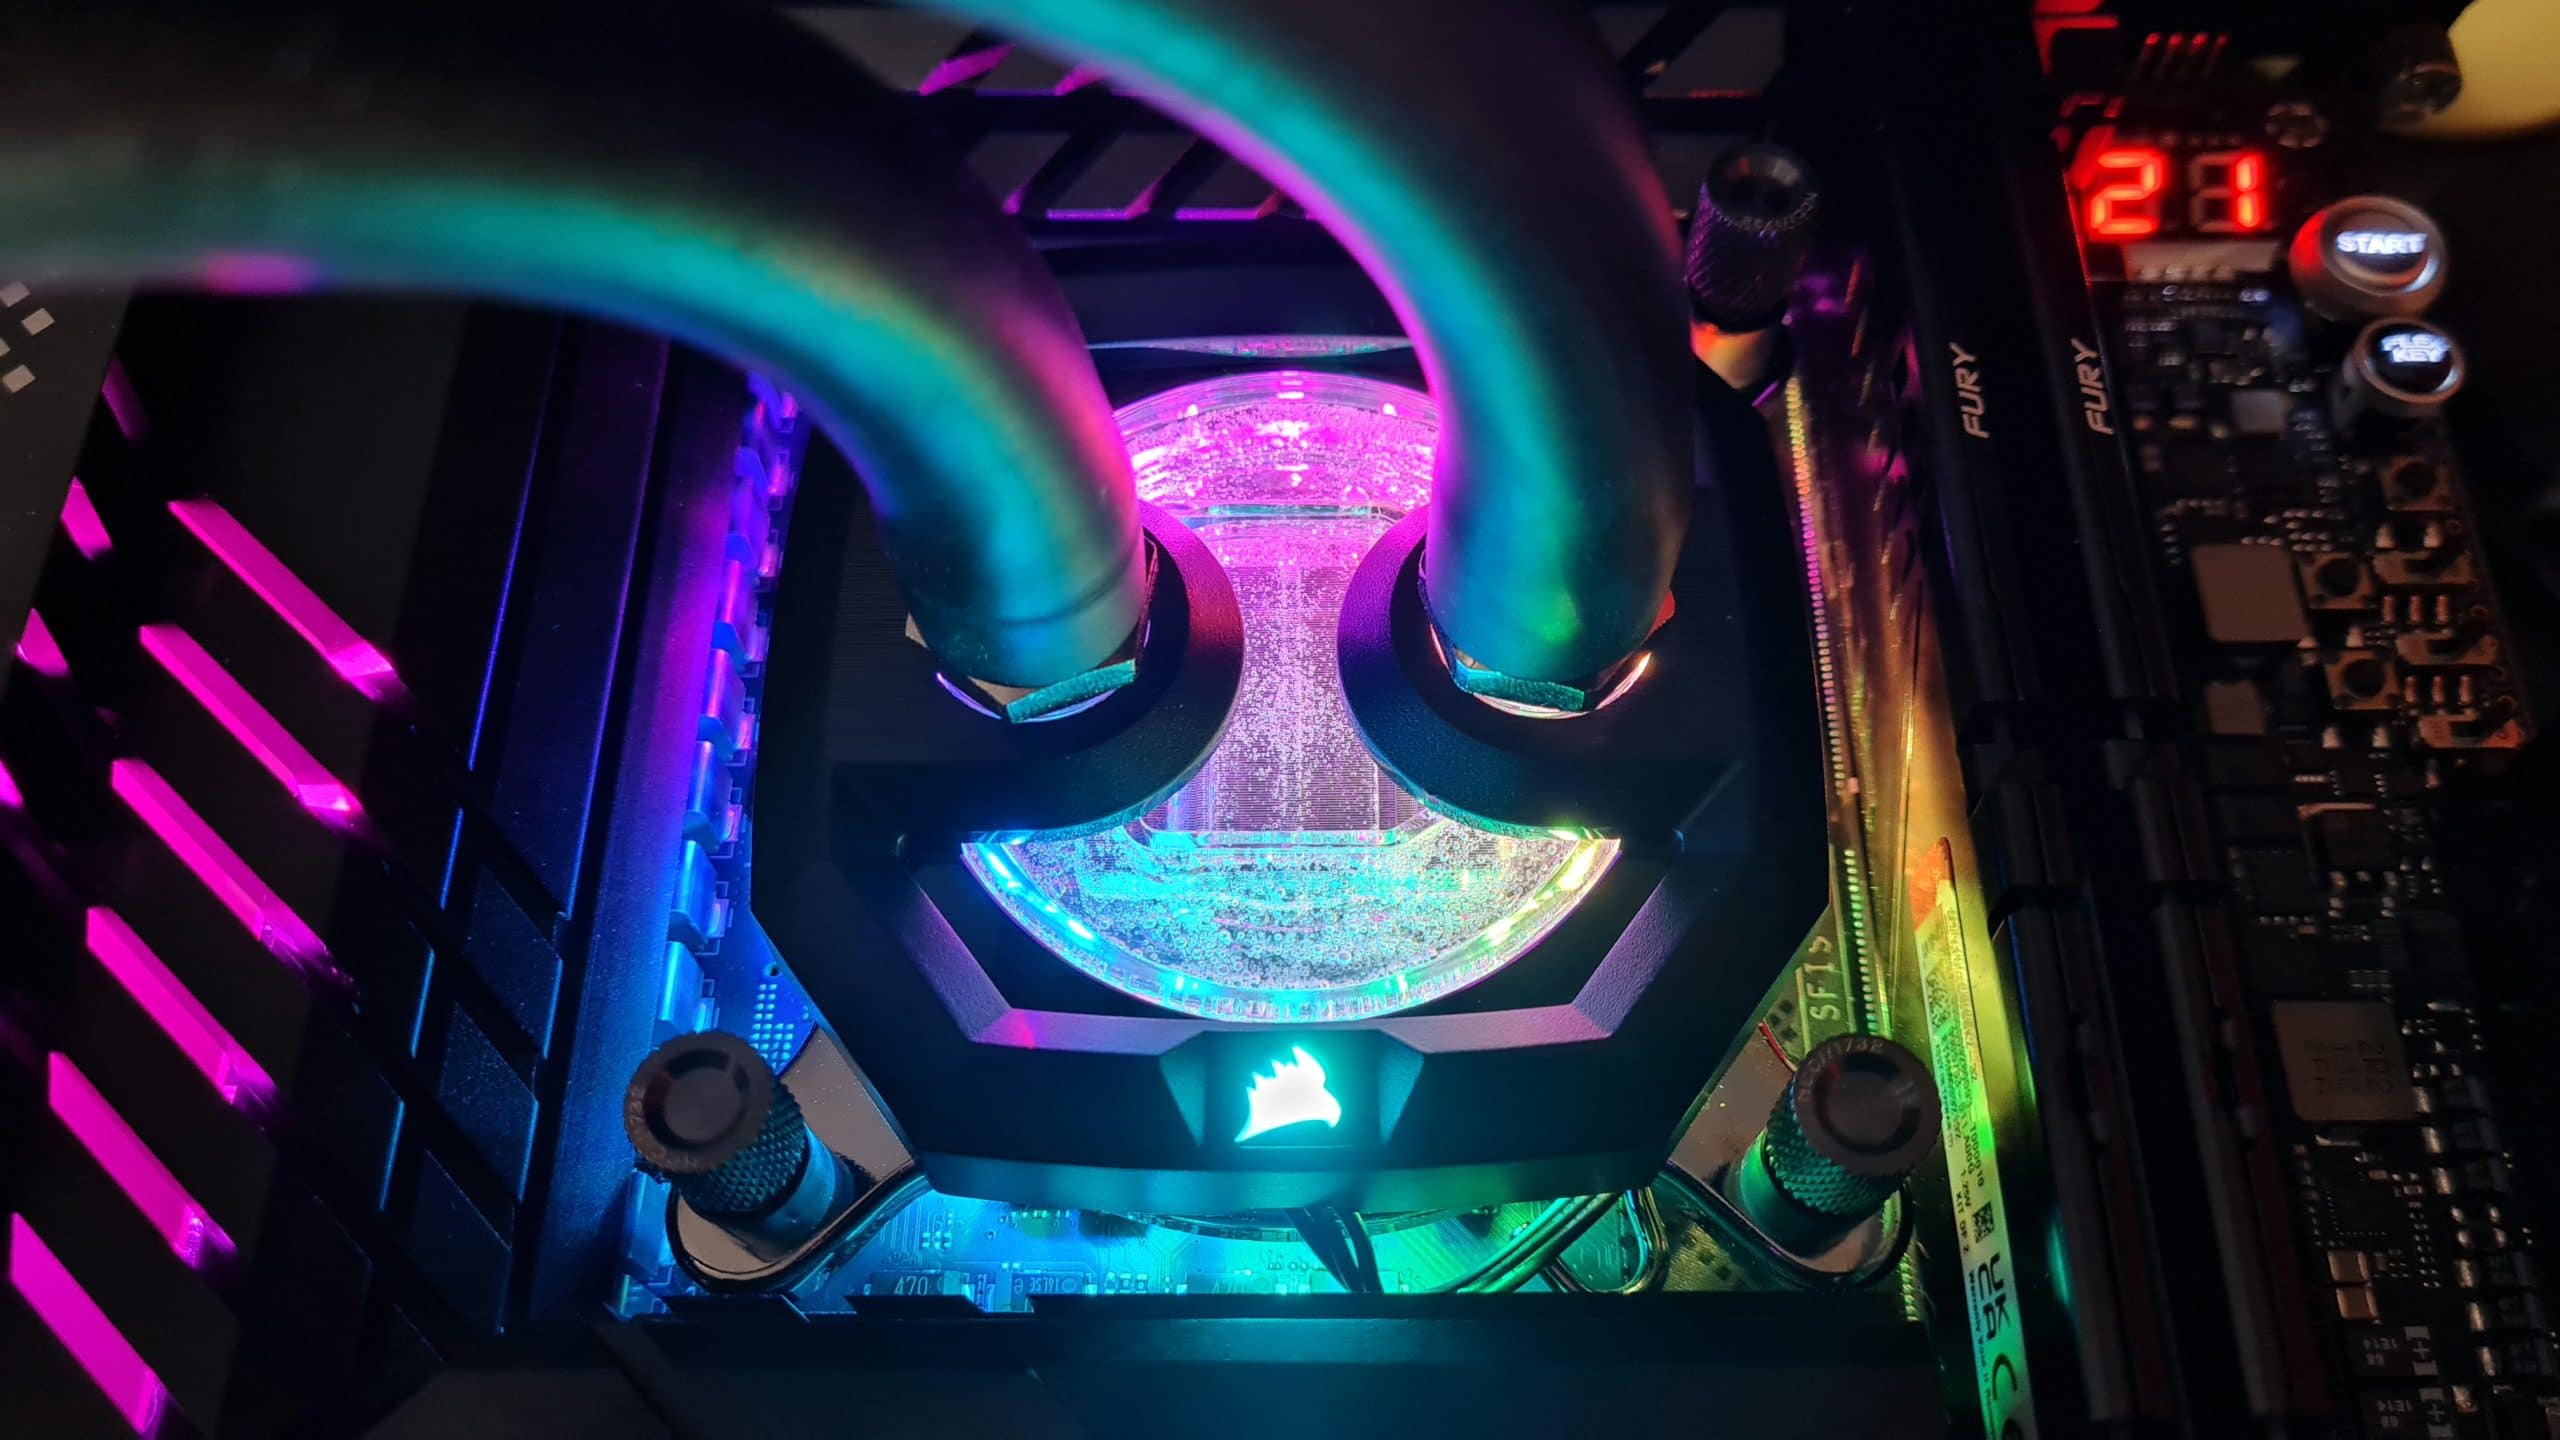 Cooling off for Alder Lake - Corsair XC7 RGB PRO LGA 1700 water block in the stress test with the Intel Core i9-12900K OC